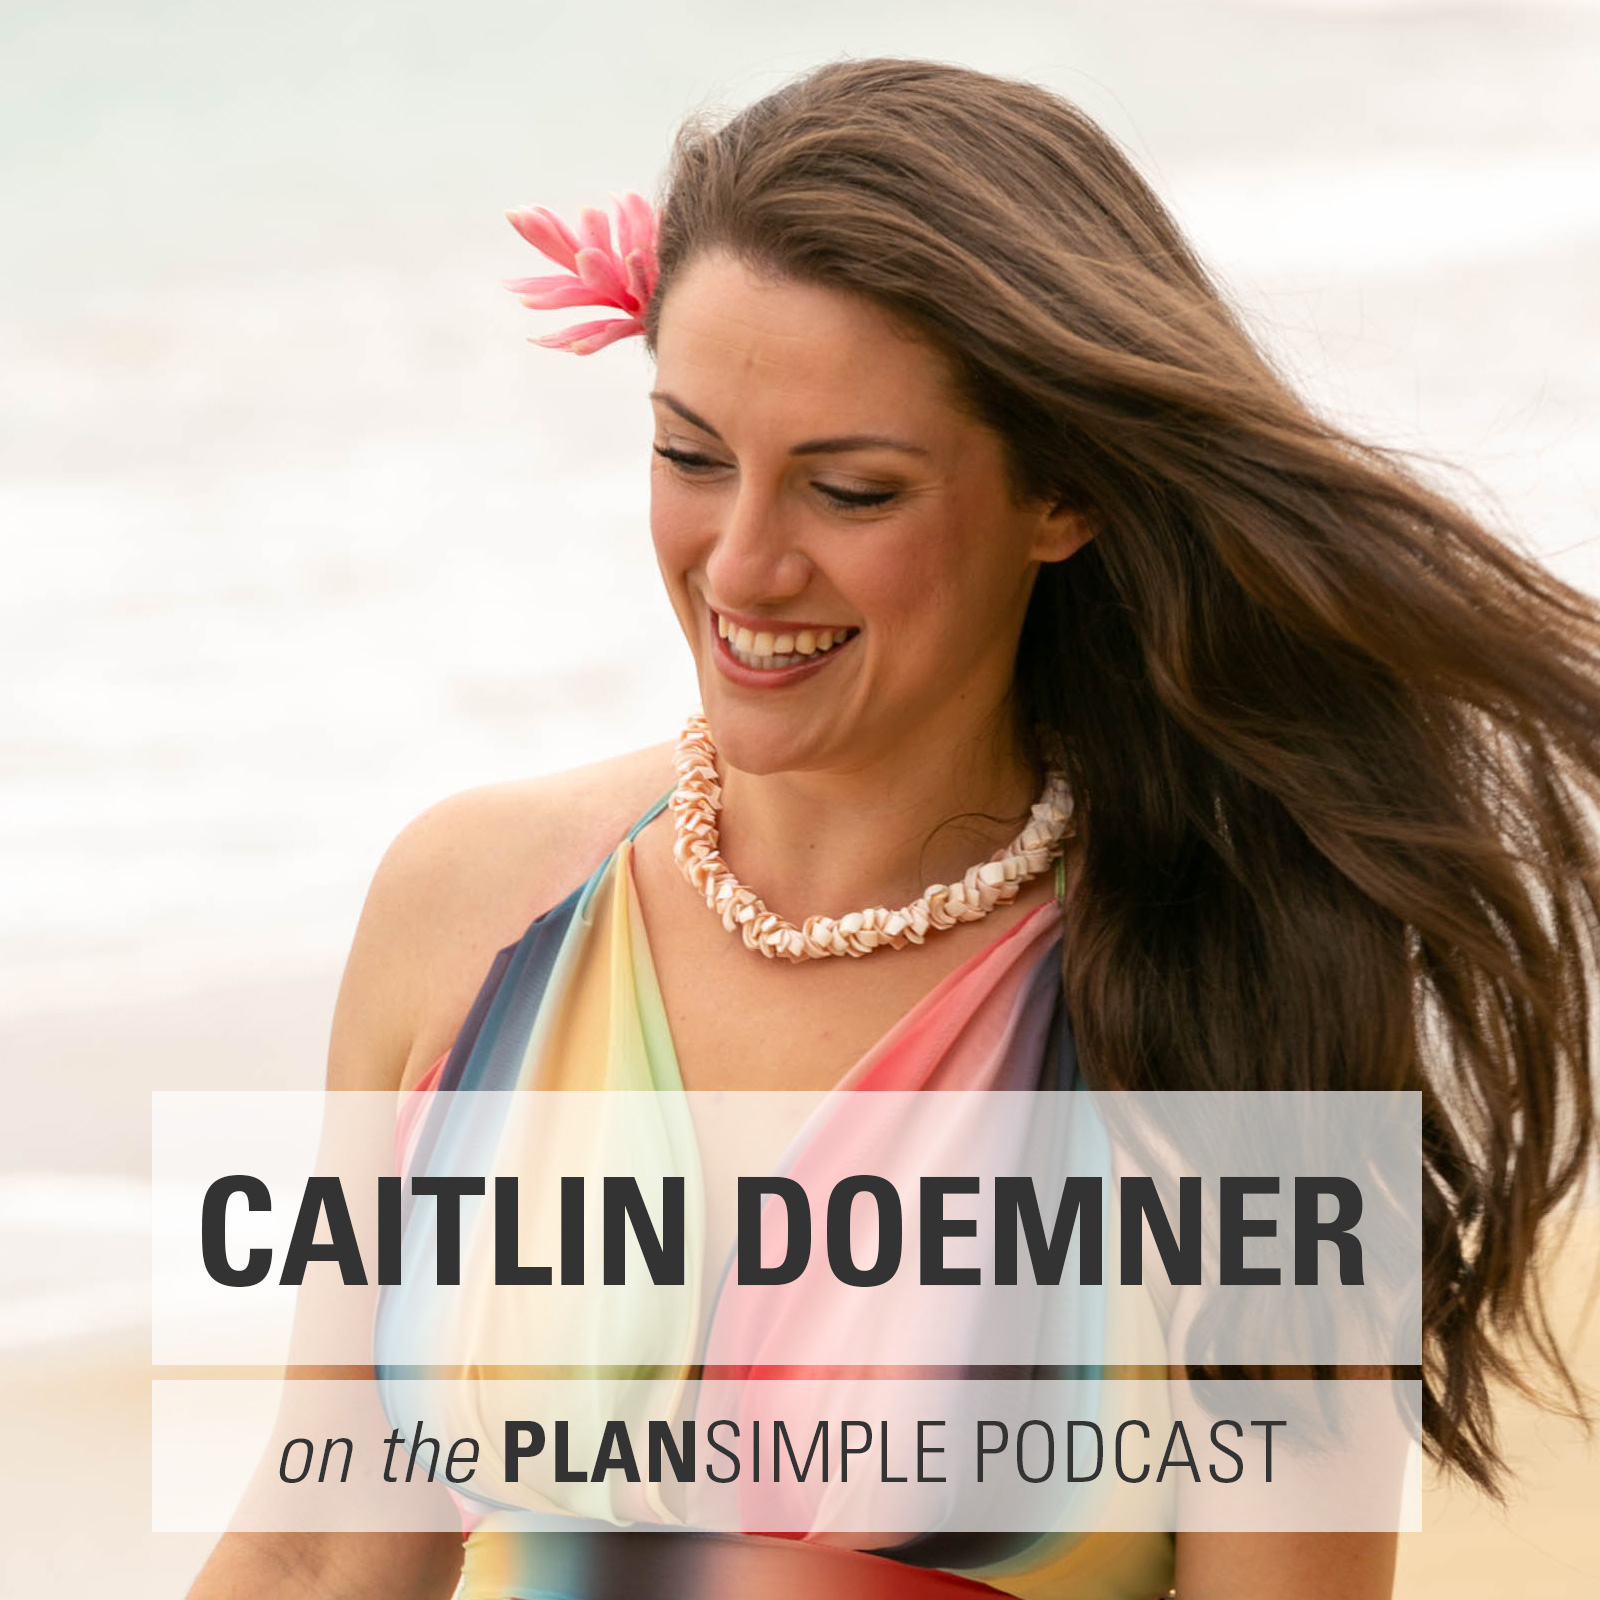 Plan for Sex with Caitlin Cogan Doemner